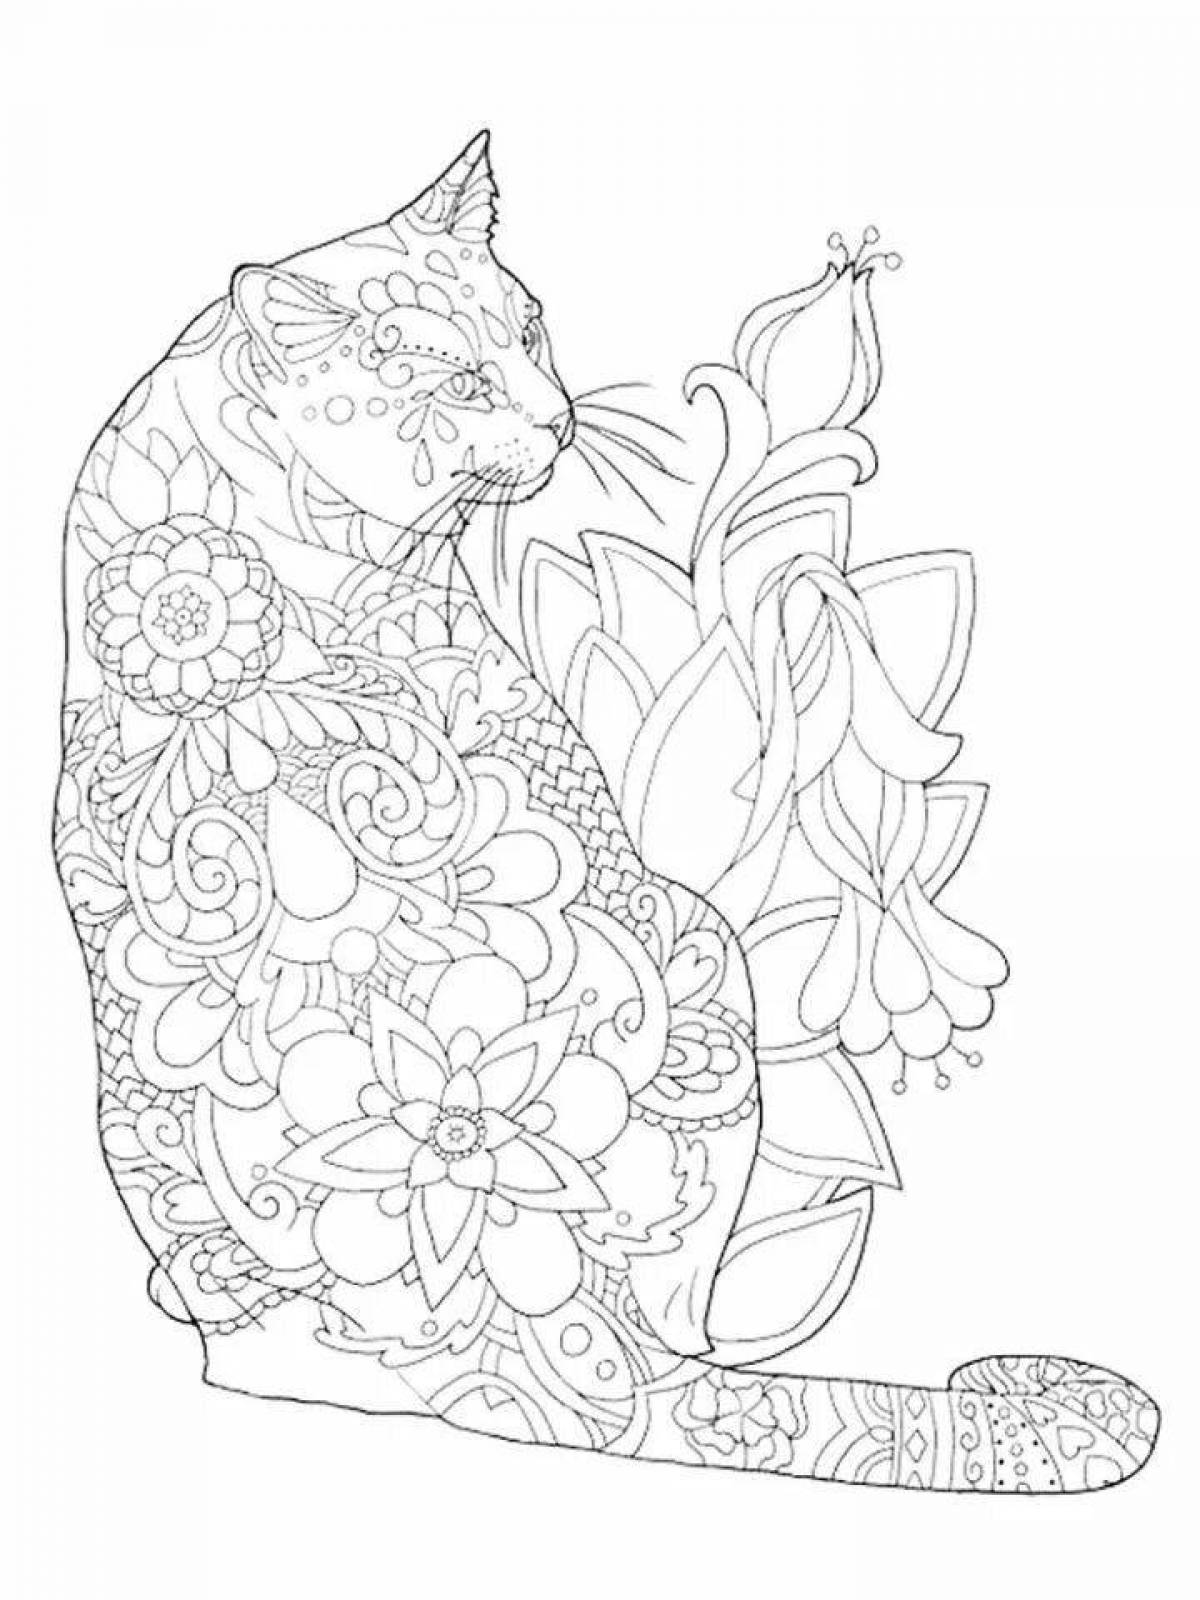 Exquisite anti-stress cat therapy coloring book